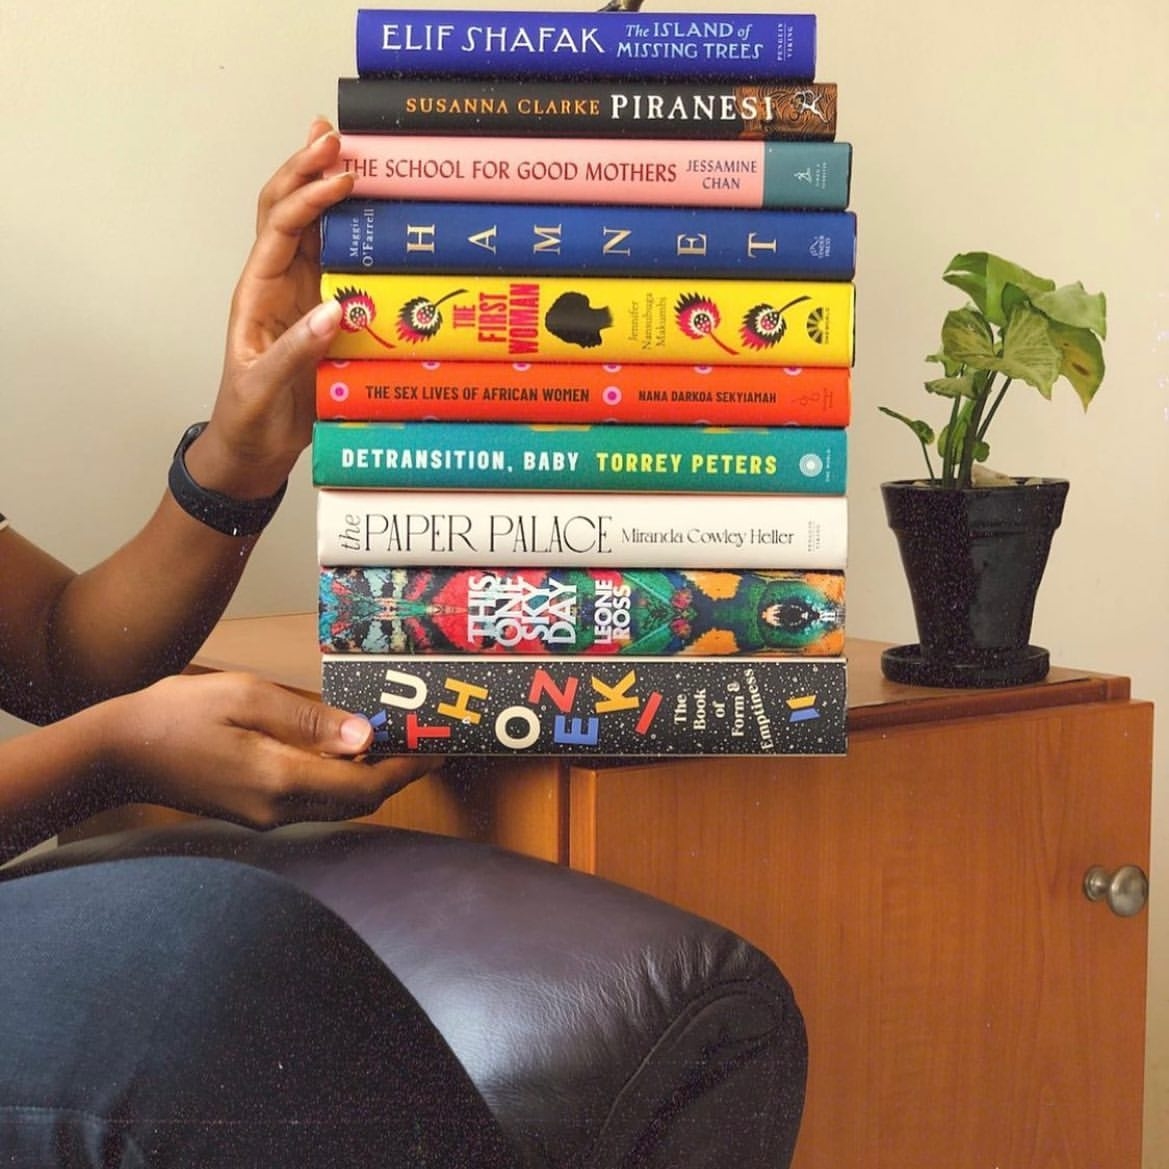 #BookLovers We love a good bookstack photo 😍••Make sure to tag us in your book collection pictures/videos! We love to see them 😍••📸: @the.eworm #thebookjoint #blackpeopleread #writer #poet #poetry #blackauthor #blackauthors #blackauthorsmatter #africandiaspora #bookstag